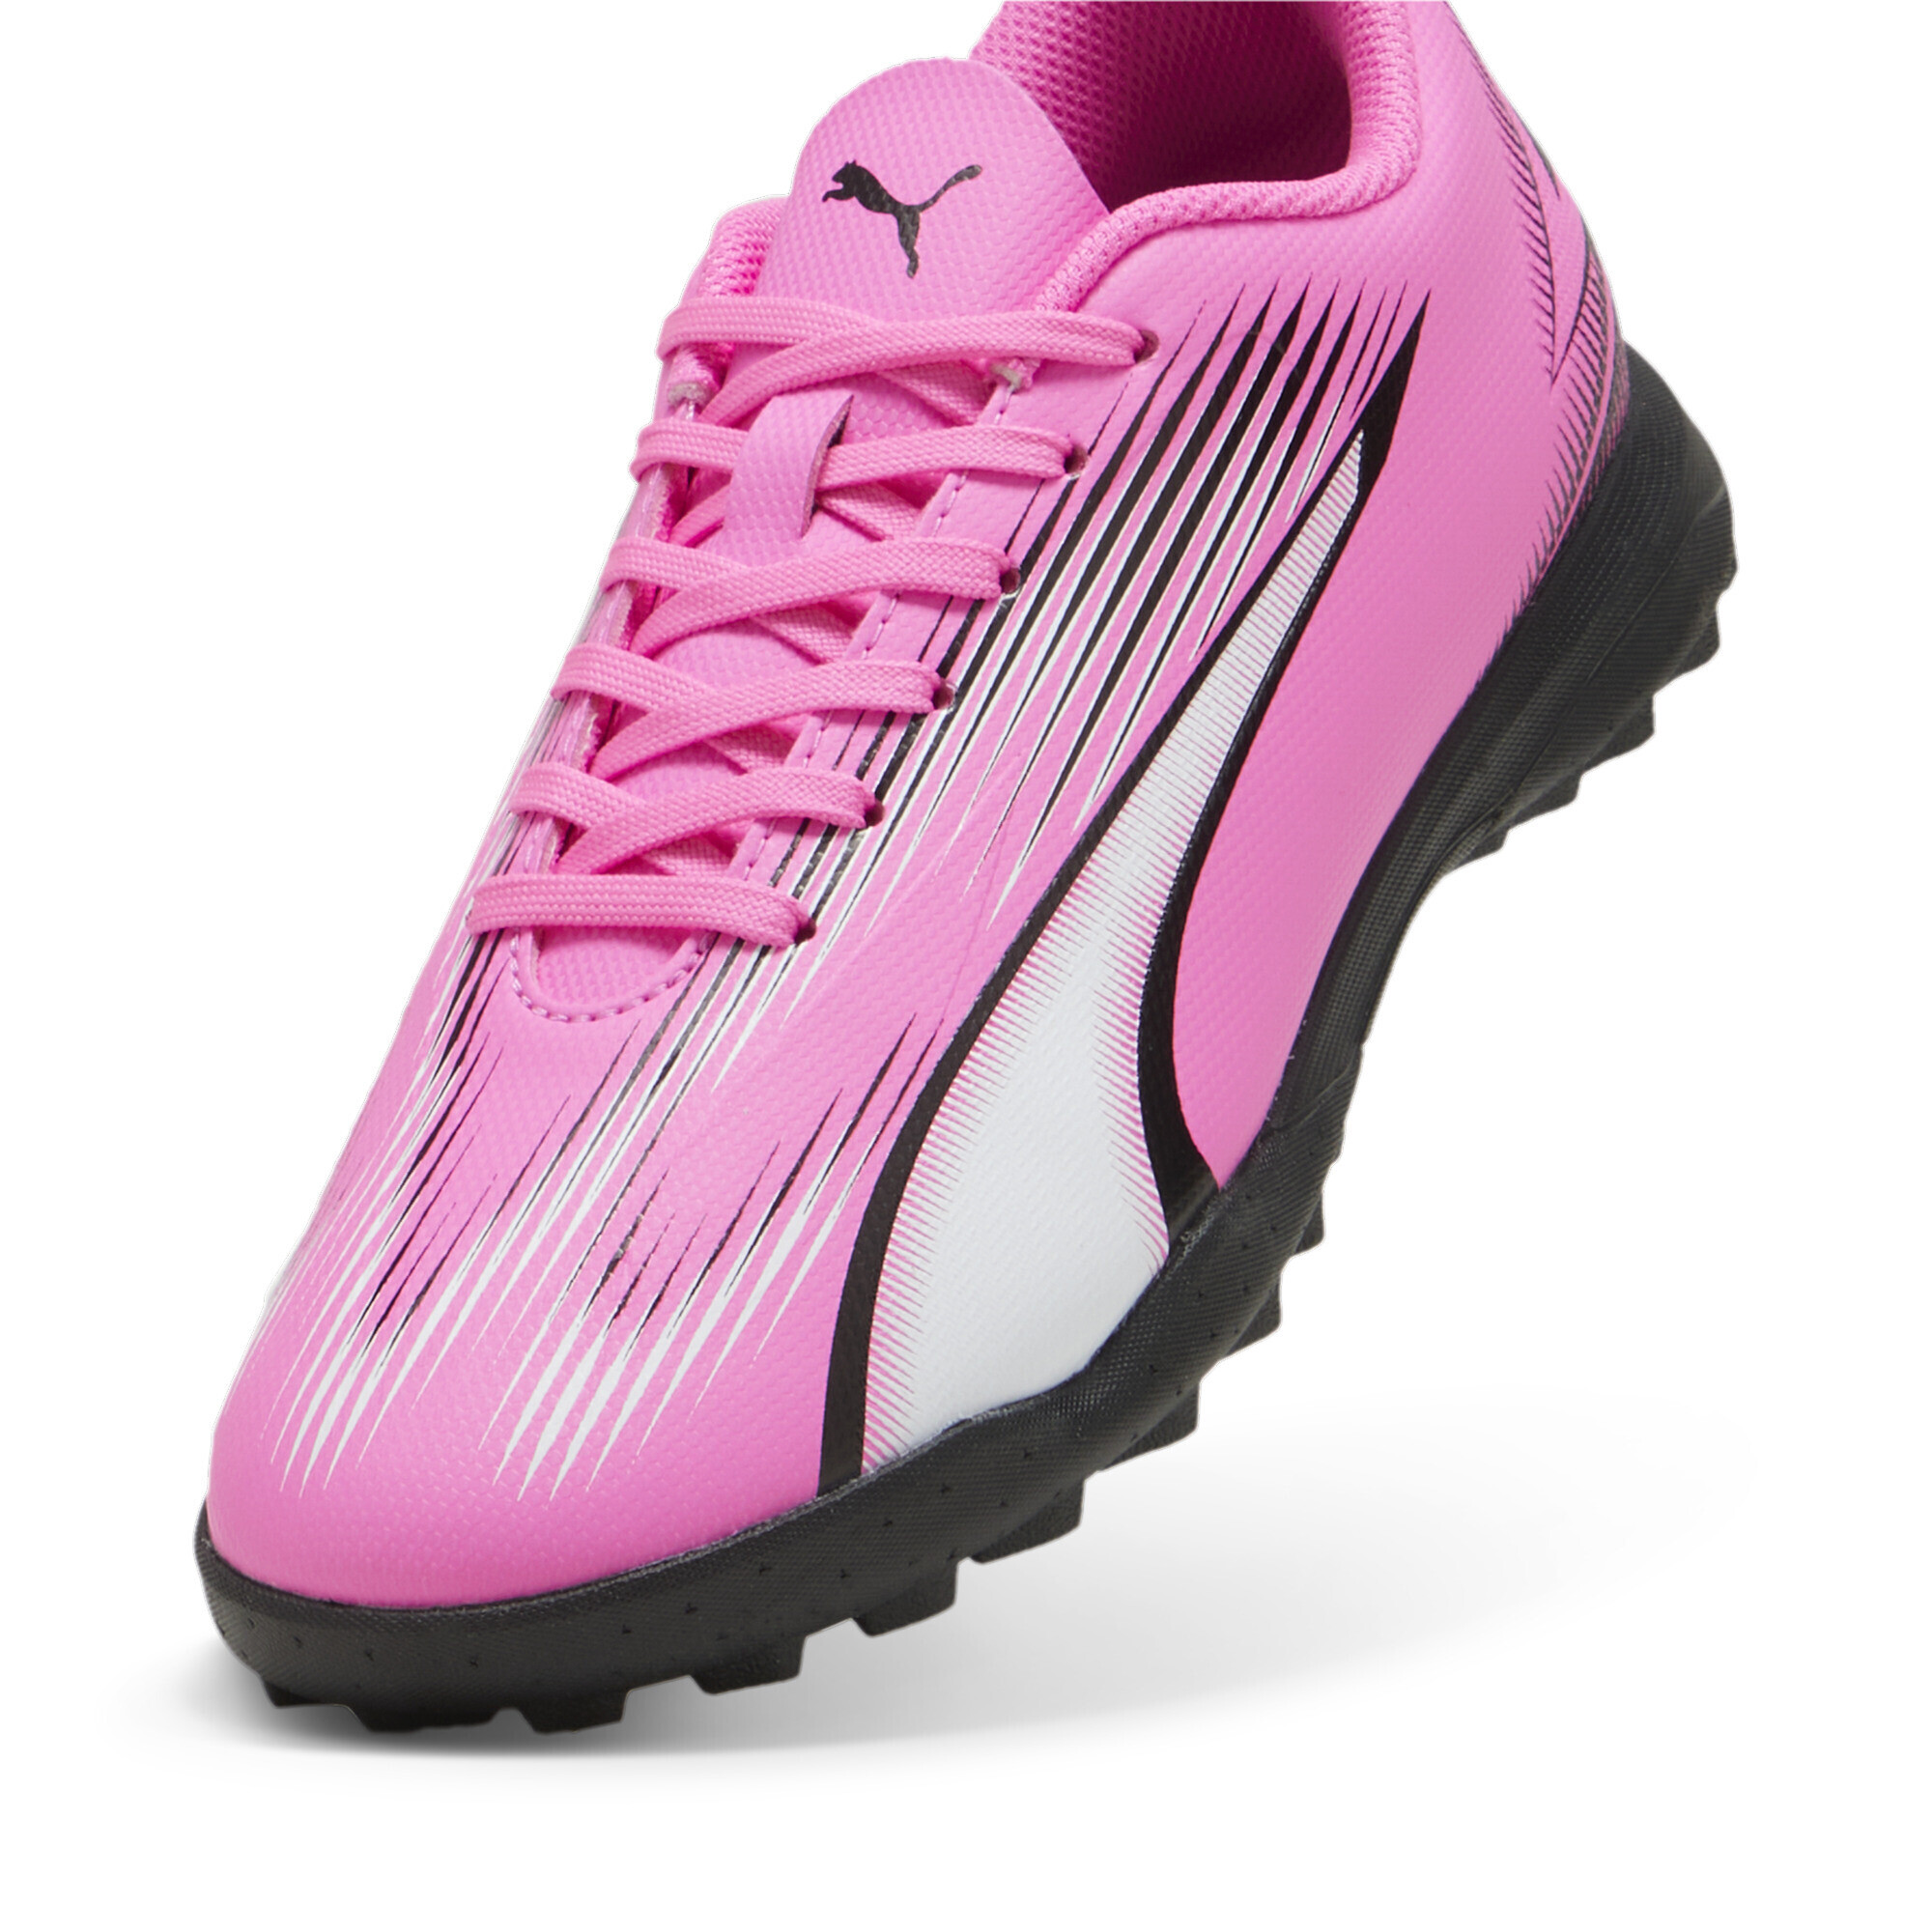 PUMA ULTRA PLAY TT Youth Football Boots In Pink, Size EU 35